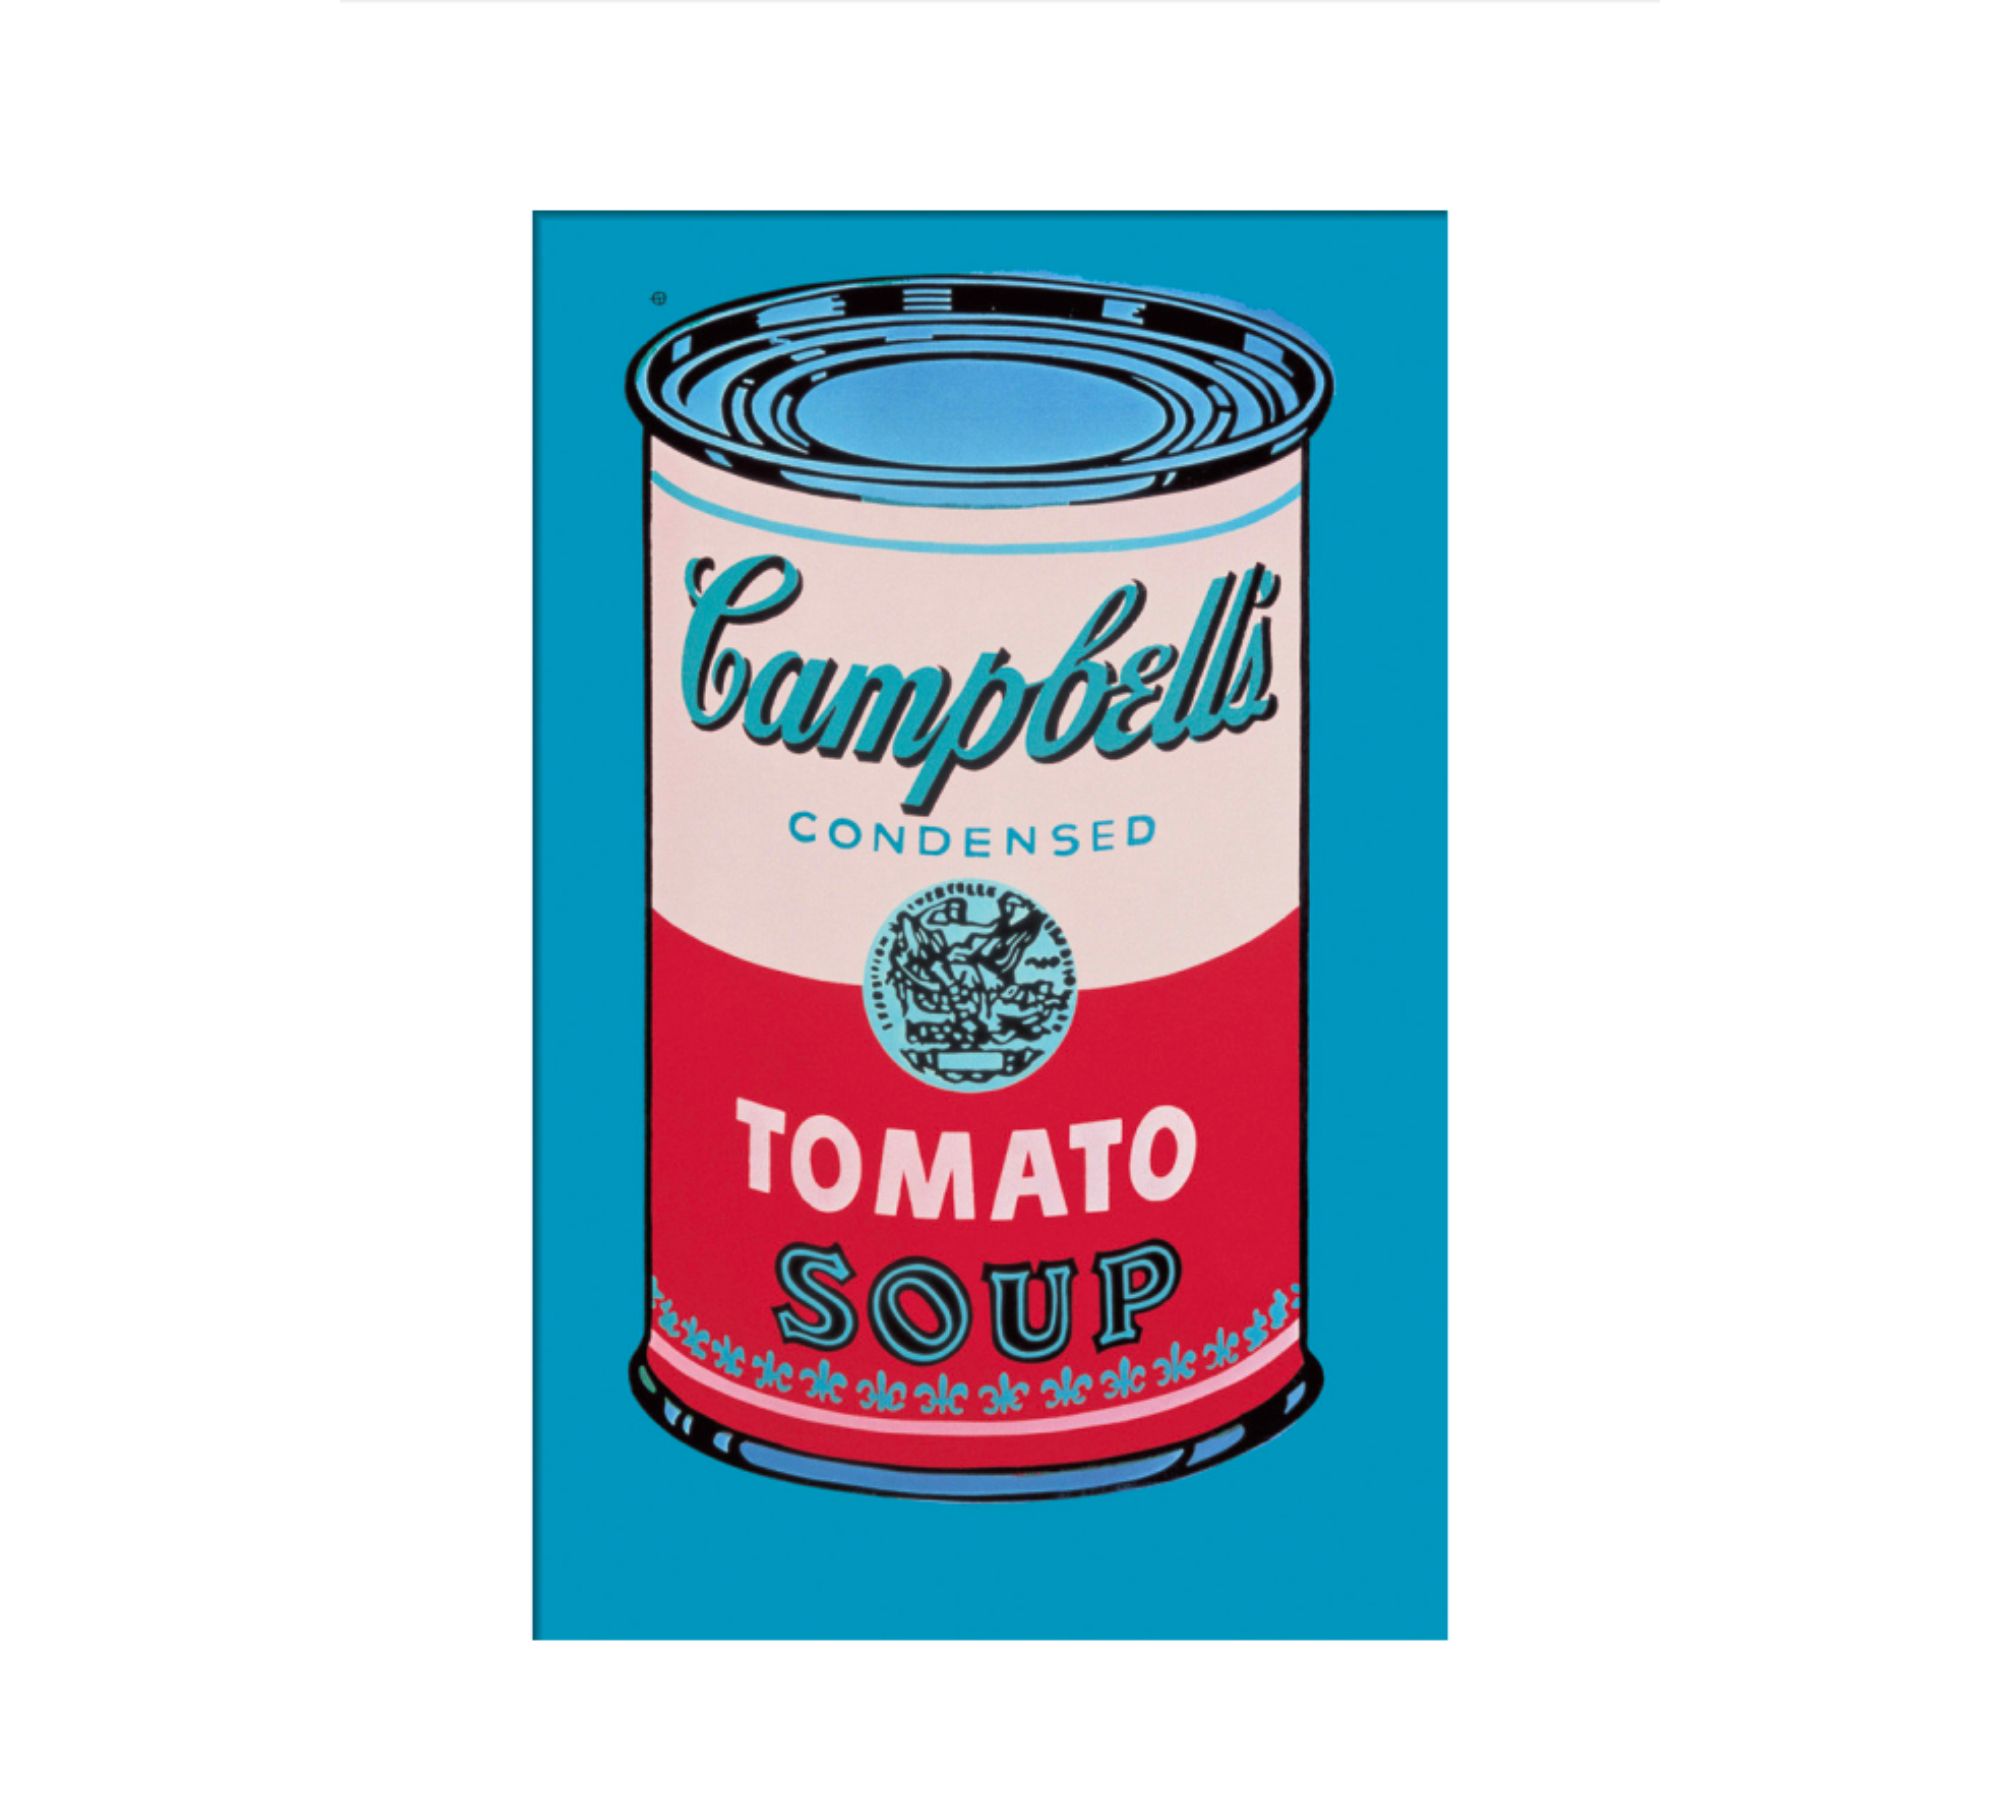 Campbell's Soup Can, 1955 - Andy Warhol 36 x 28 cm